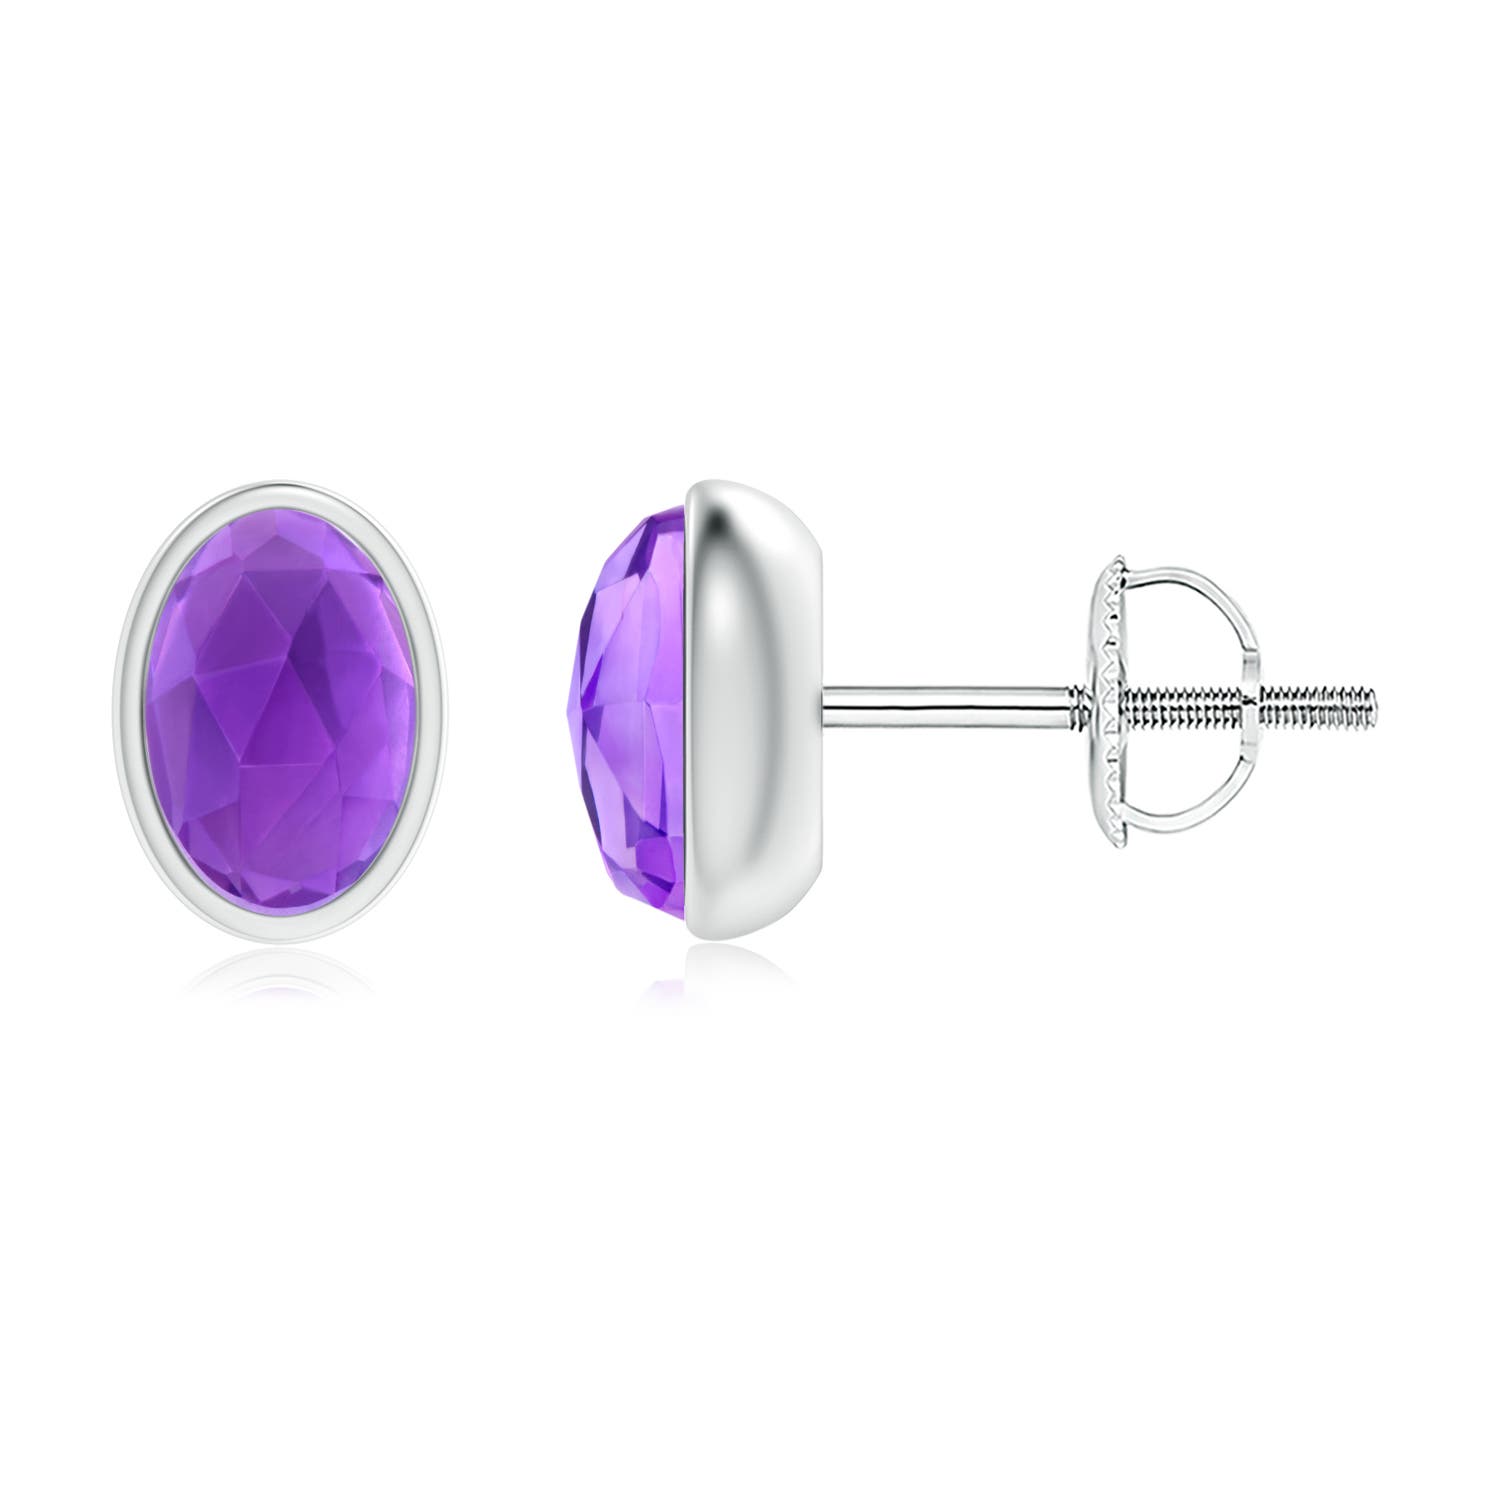 AAA - Amethyst / 1 CT / 14 KT White Gold